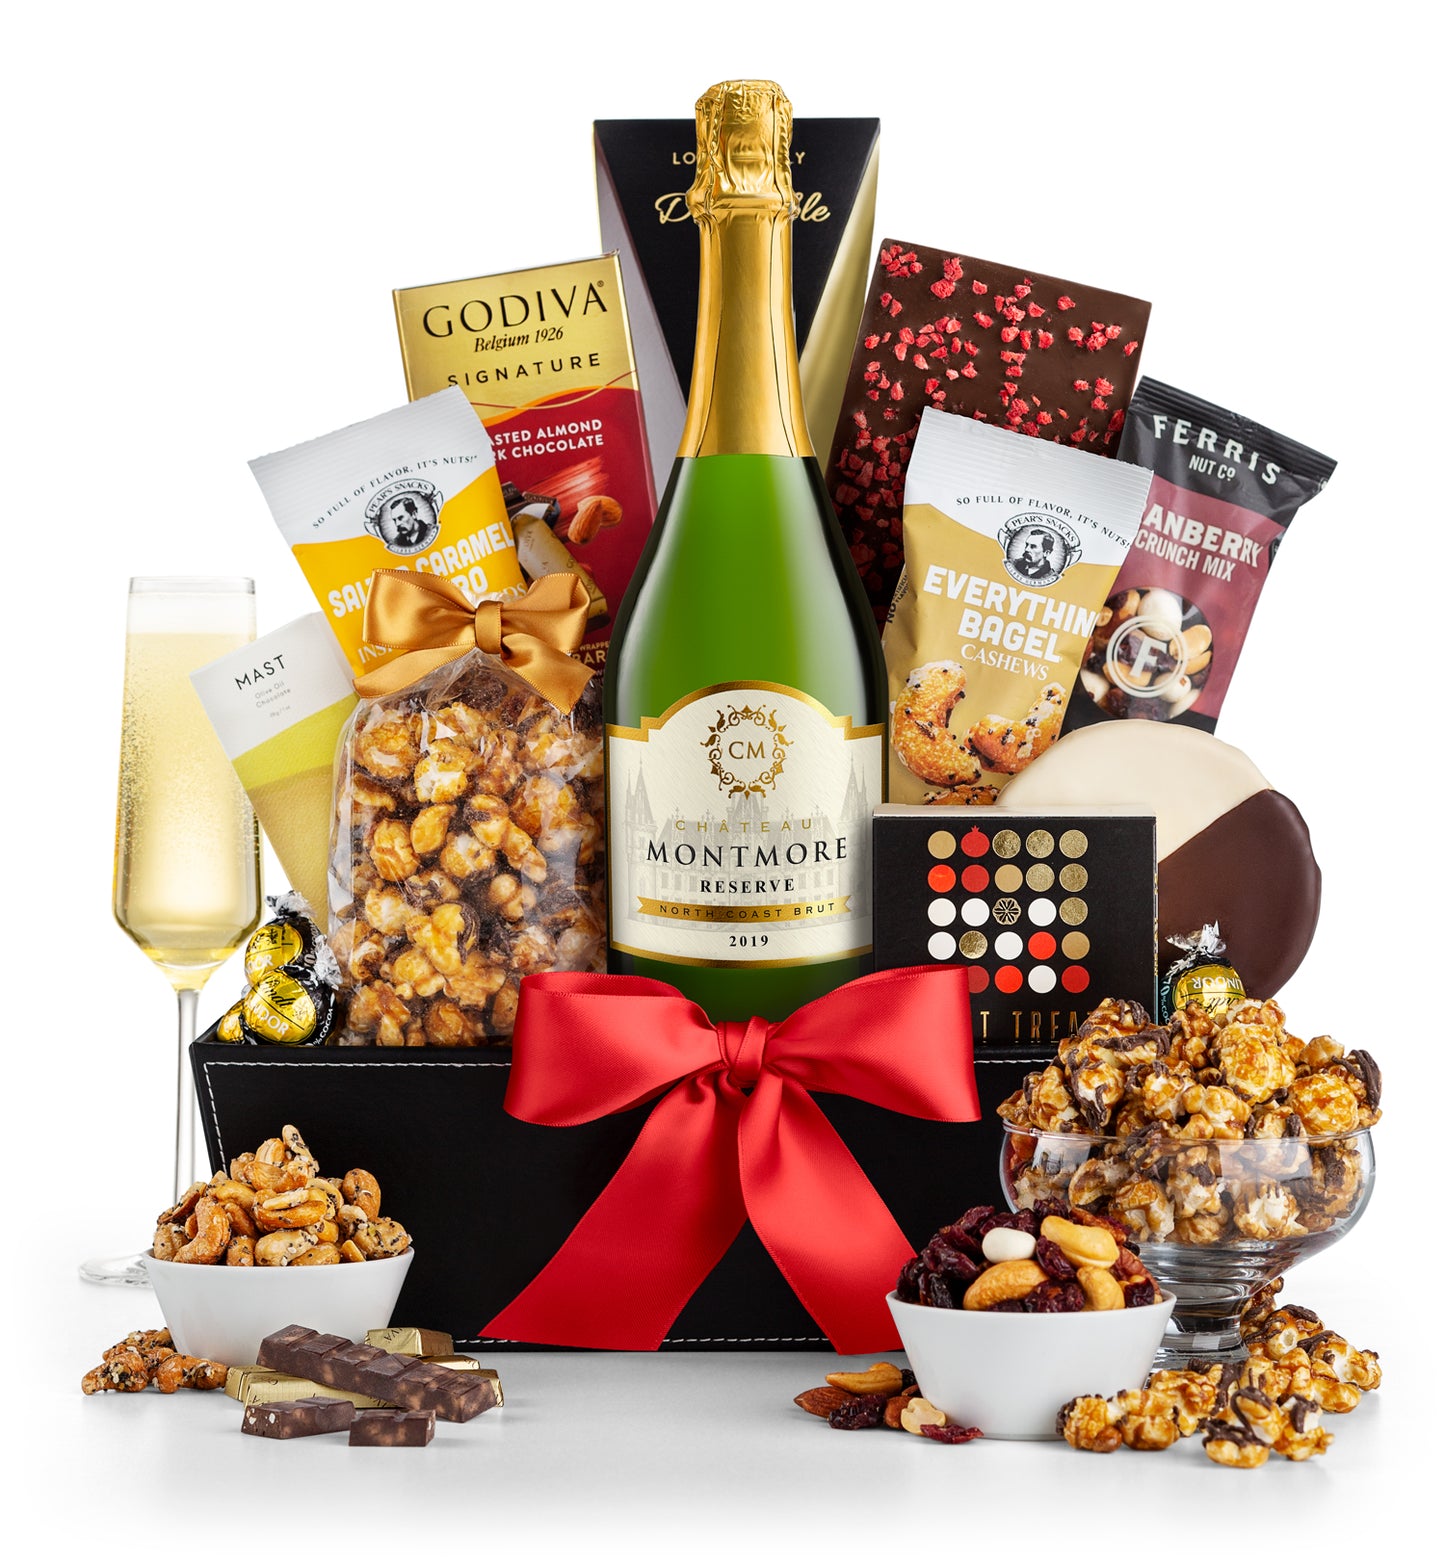 5th Avenue gift basket and Chateau Montmore sparkling wine